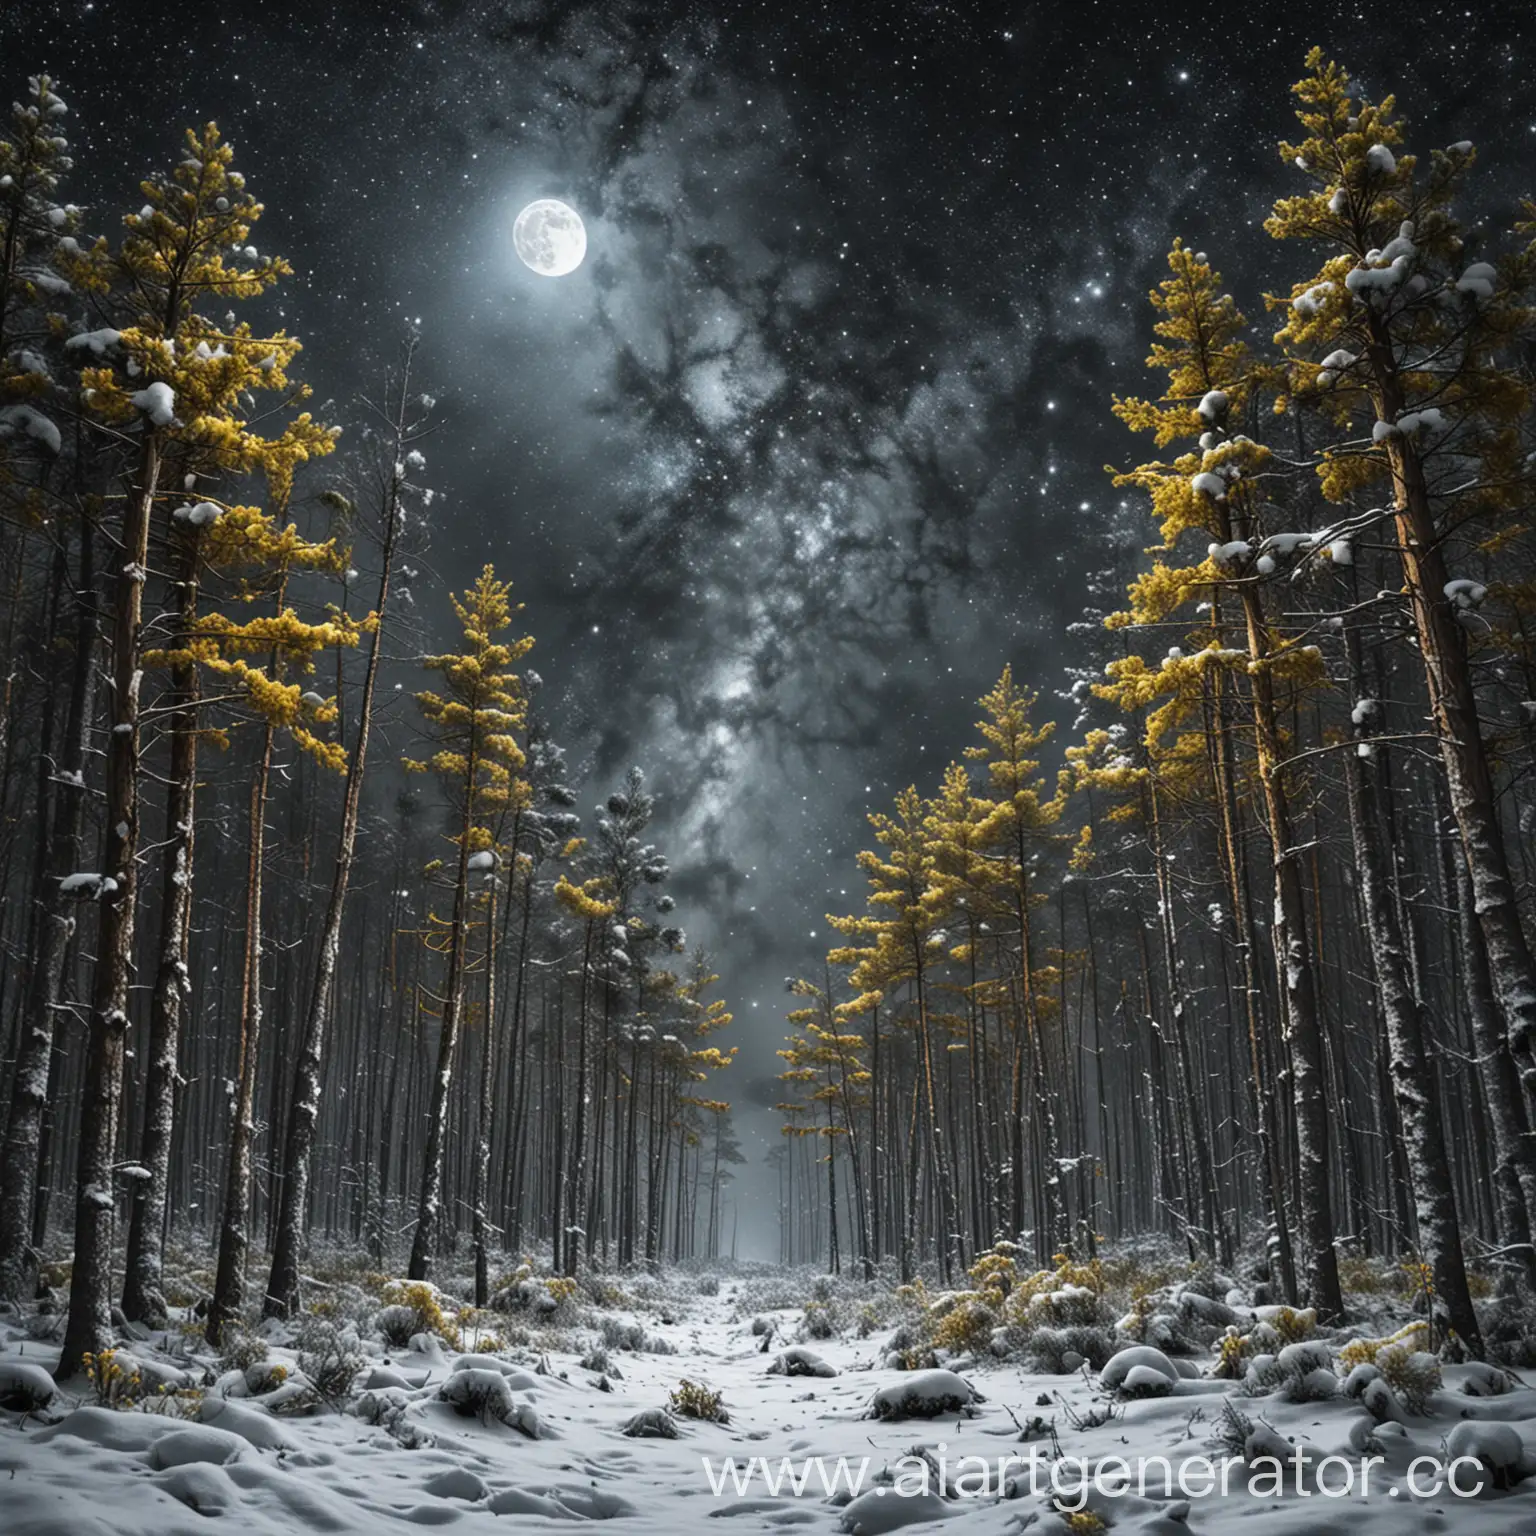 Enchanting-Night-Scene-Glowing-Snowy-Pine-Forest-with-Twin-Moons